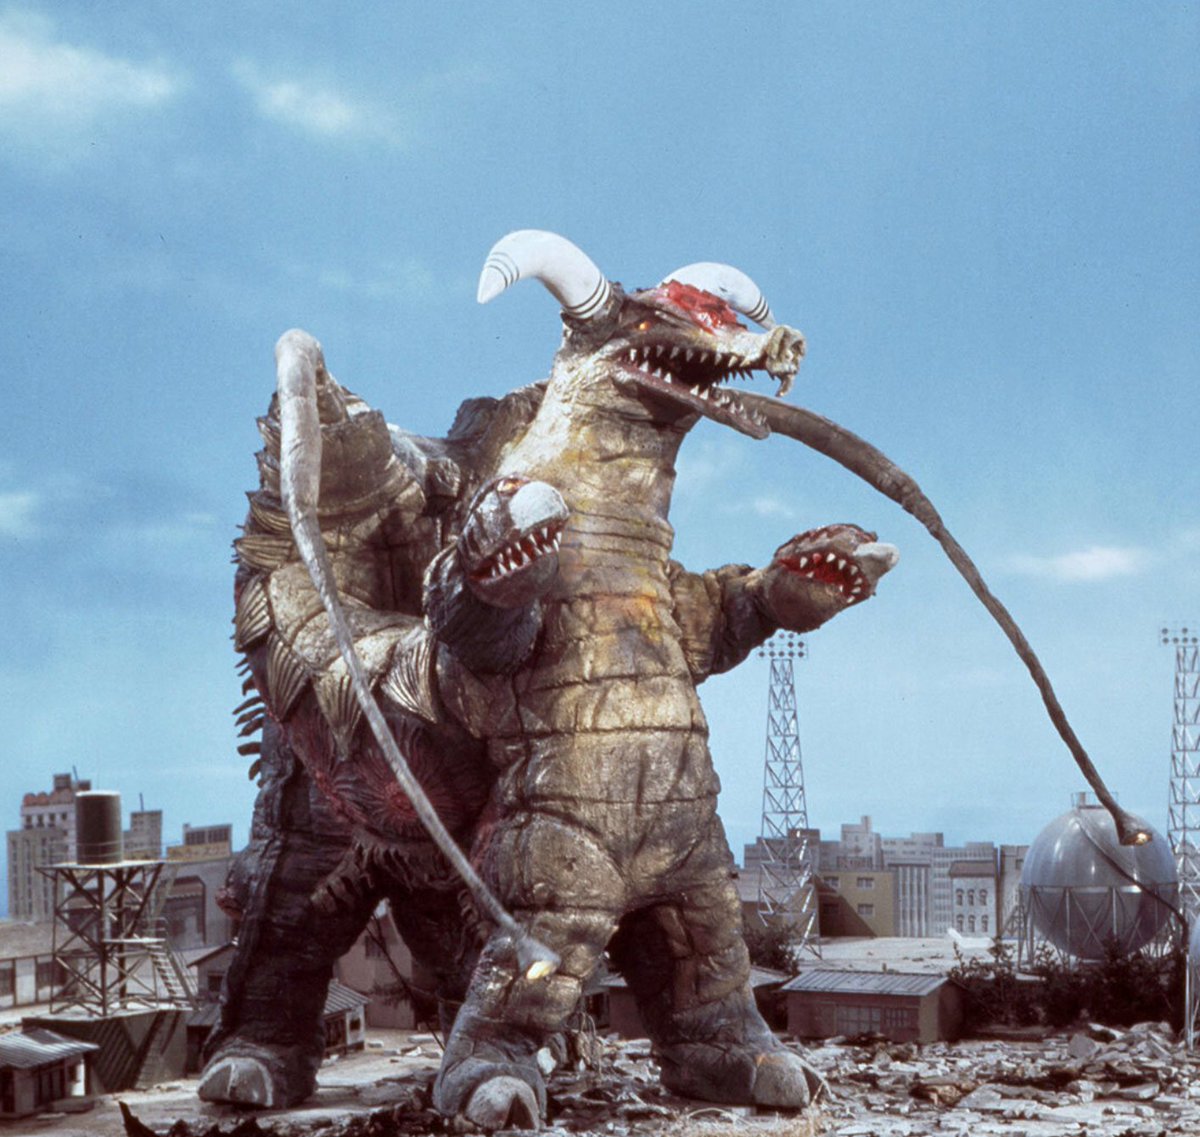 Honestly im surprised Taguchi havent 'forced' tsupro to make a two person controlled kaiju suit for new-gen ultraman series

Wonder if we will ever see one againt